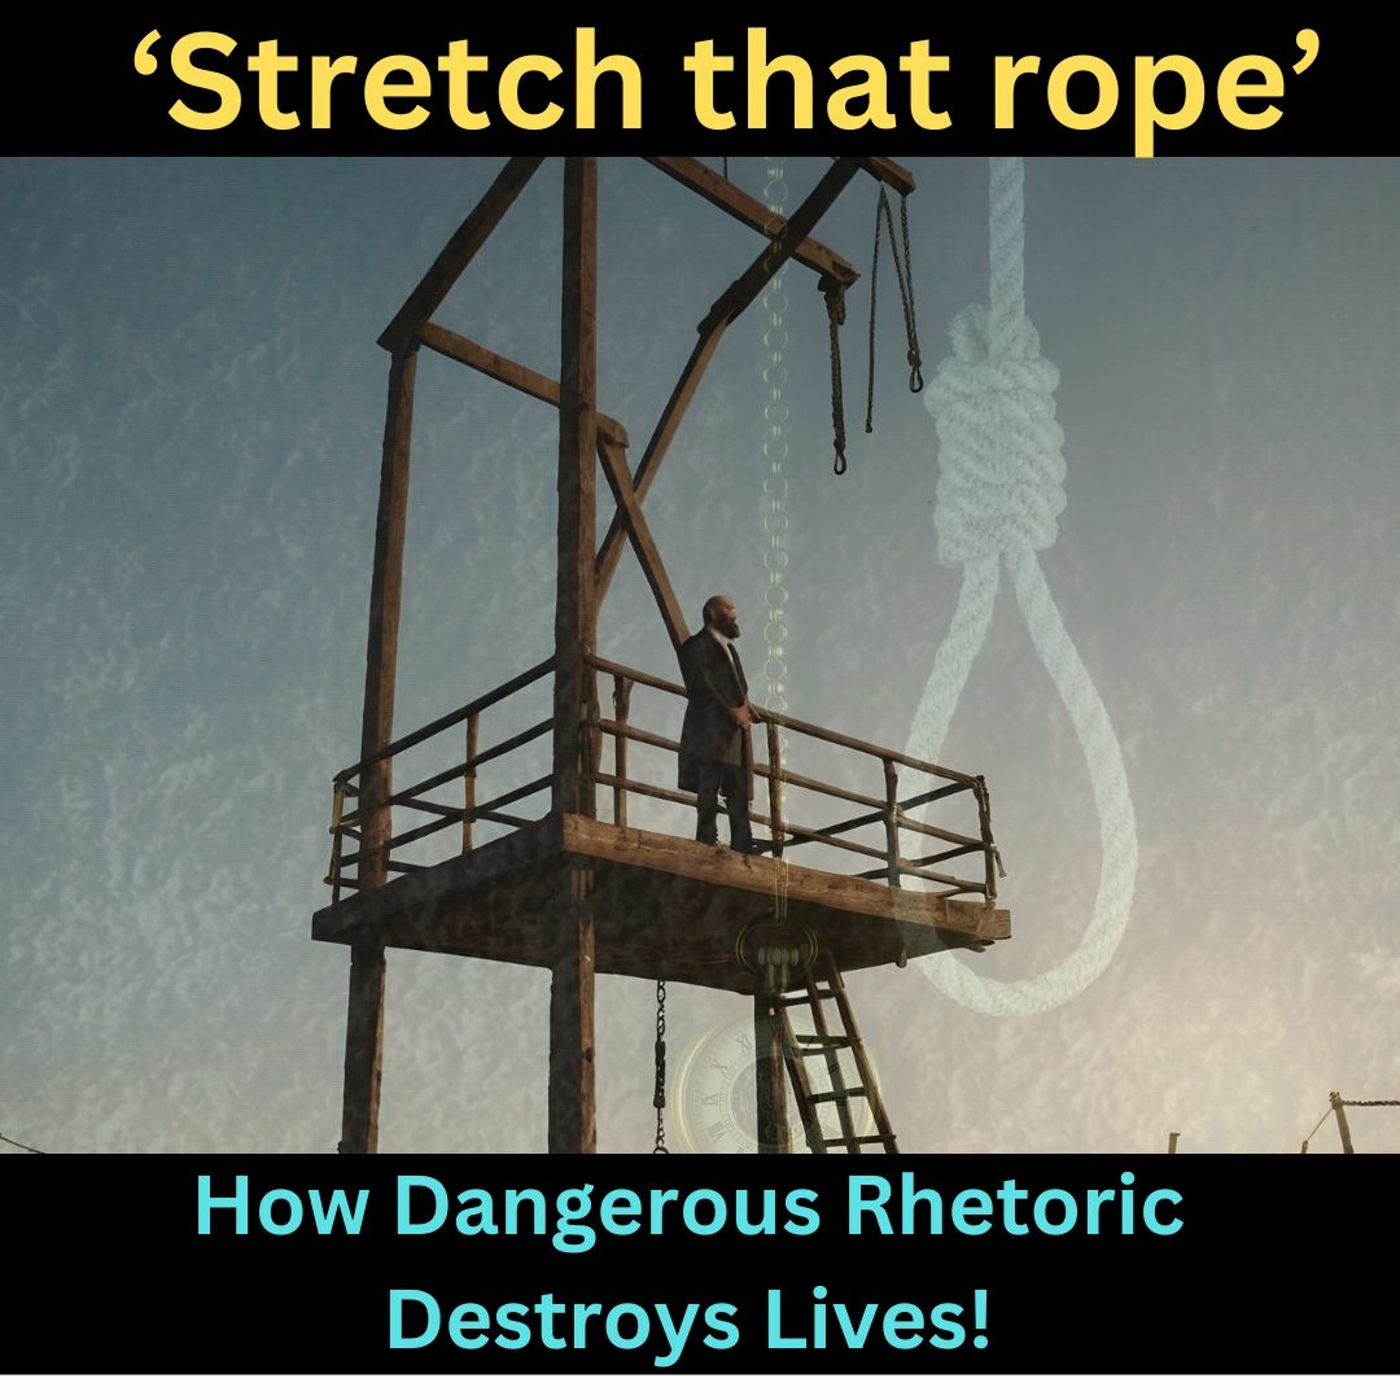 Stretch That Rope - DONT END UP IN PRISON OVER SOCIAL MEDIA! A WARNING